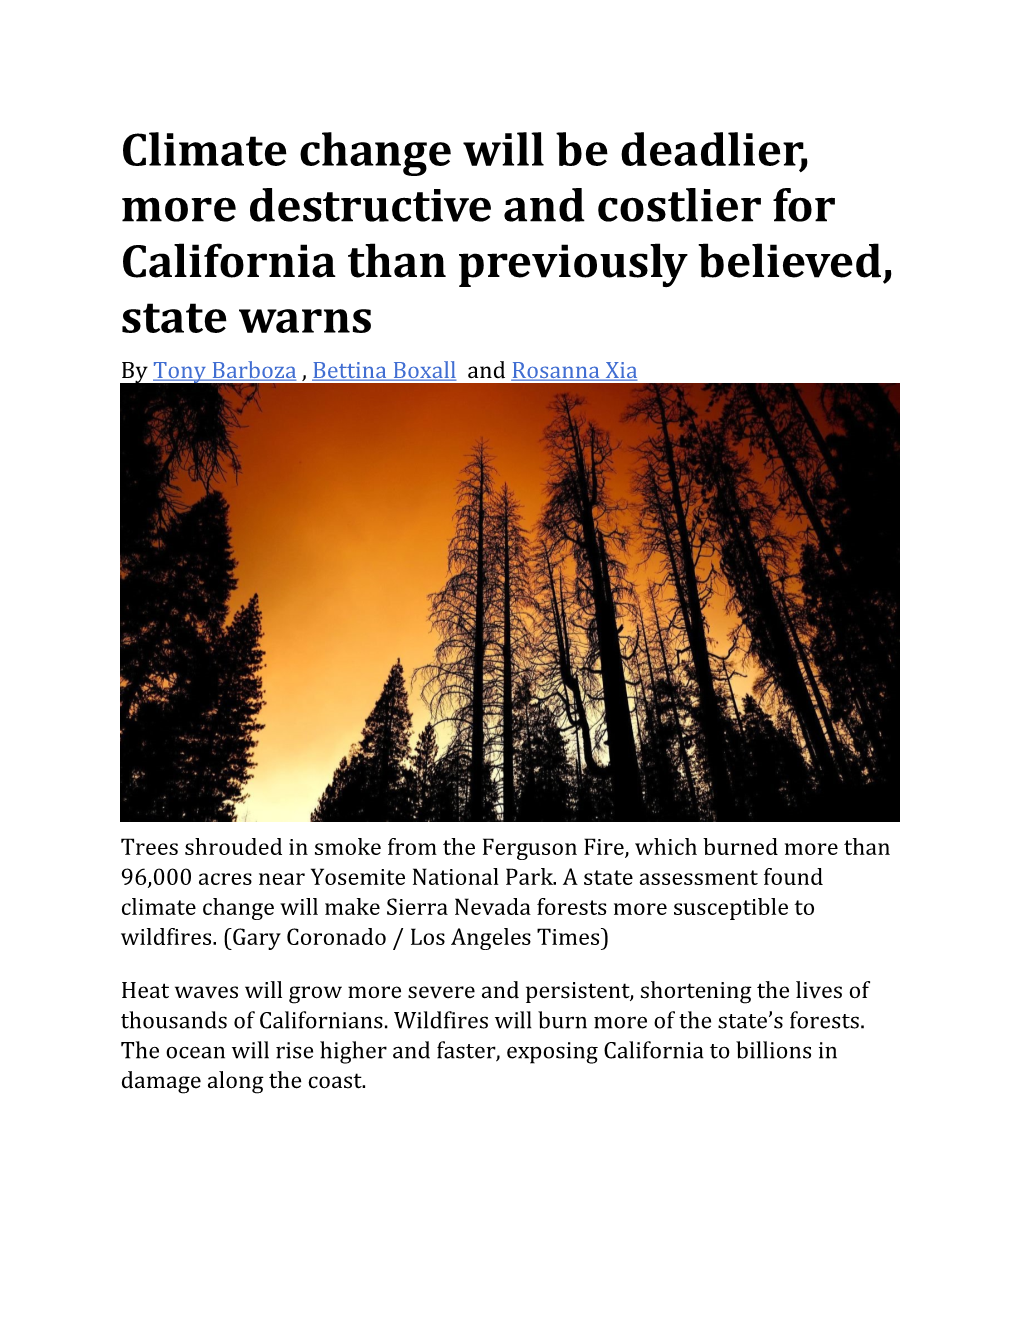 Climate Change Will Be Deadlier, More Destructive and Costlier for California Than Previously Believed, State Warns by Tony Barboza , Bettina Boxall and Rosanna Xia